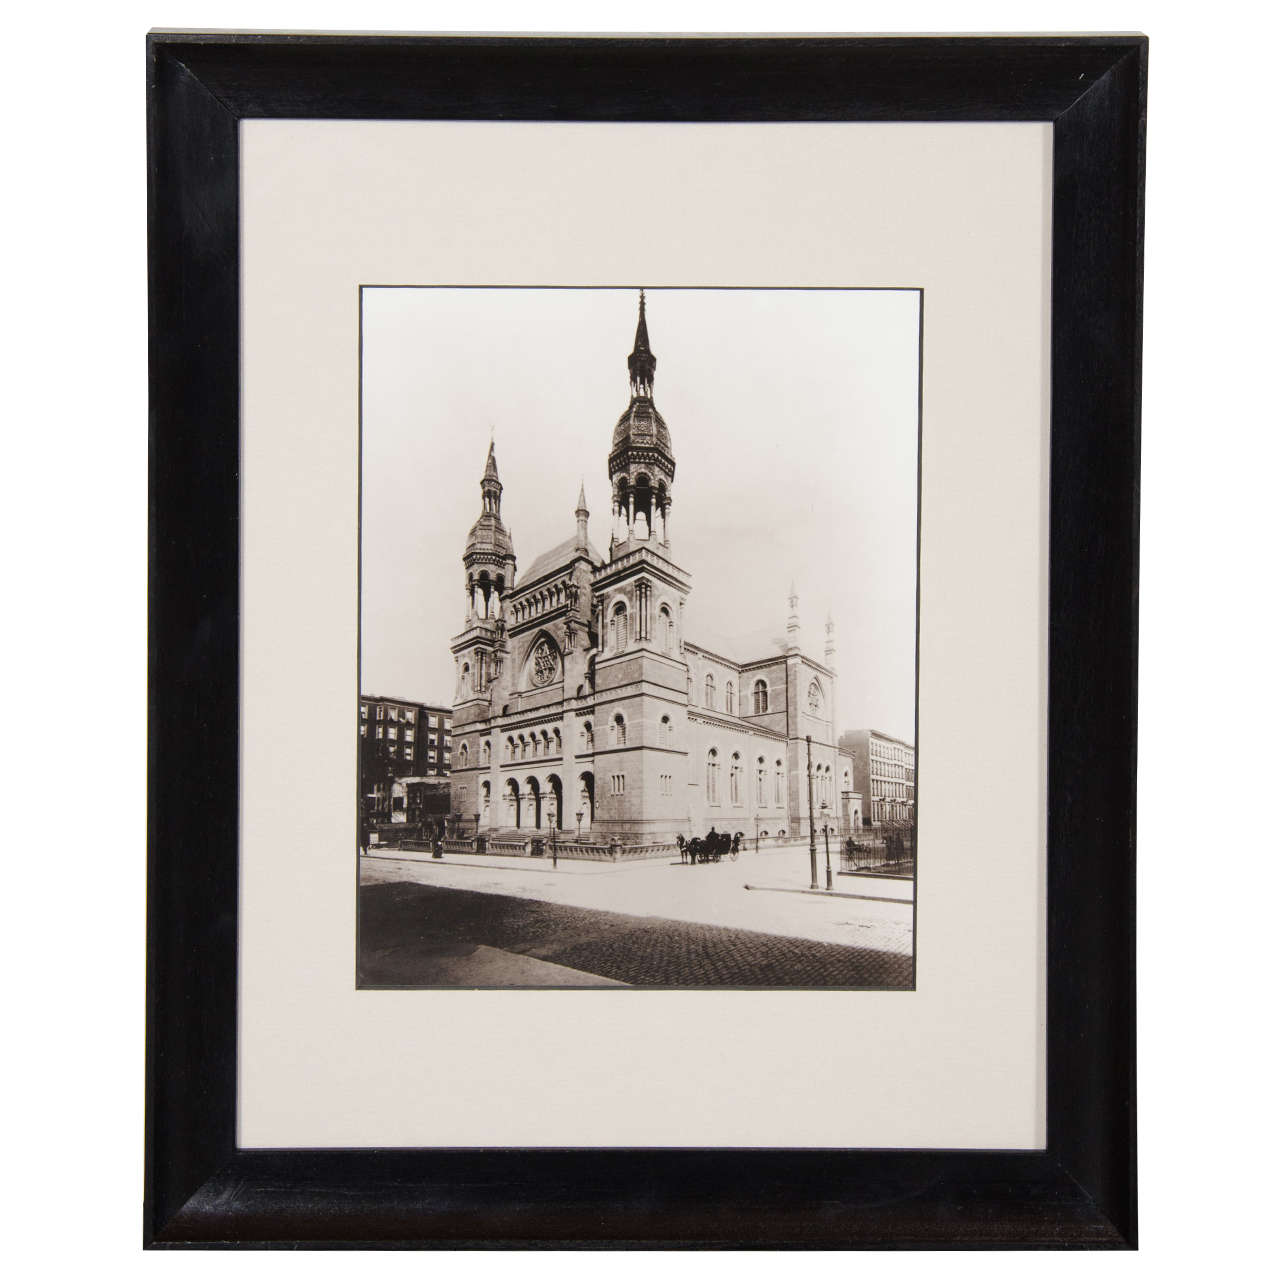 Vintage Black and White Photograph of "Temple Emanu-El"in New York City